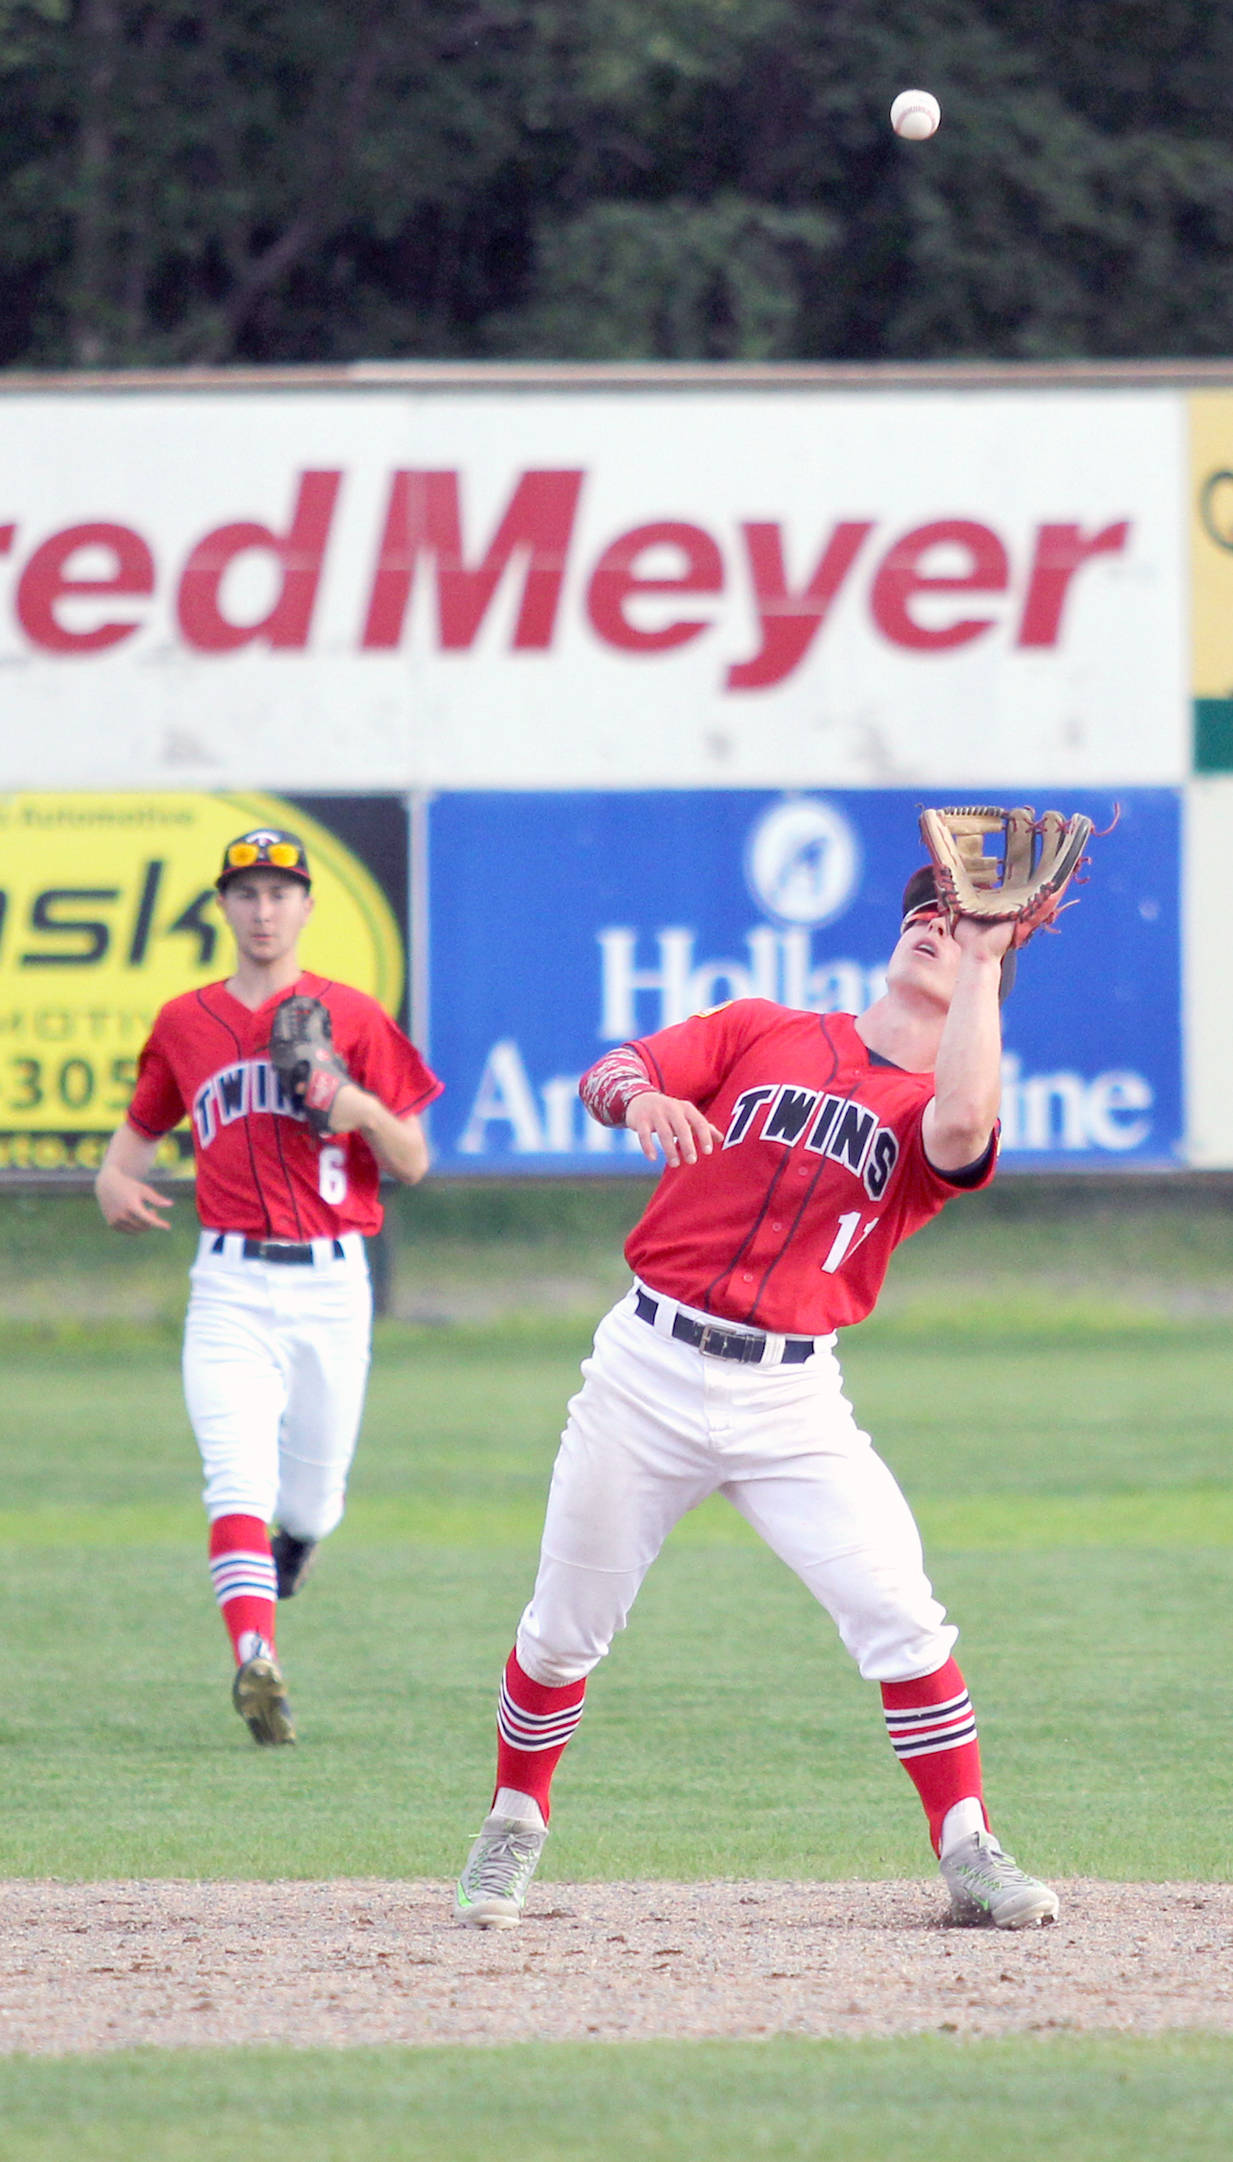 Kenai infielder Paul Steffensen catches a pop fly during an 11-3 win over the Palmer Pioneers on Friday, July 21, 2017, at Hermon Brothers Field in Palmer. (Photo by Jeremiah Bartz/Frontiersman)